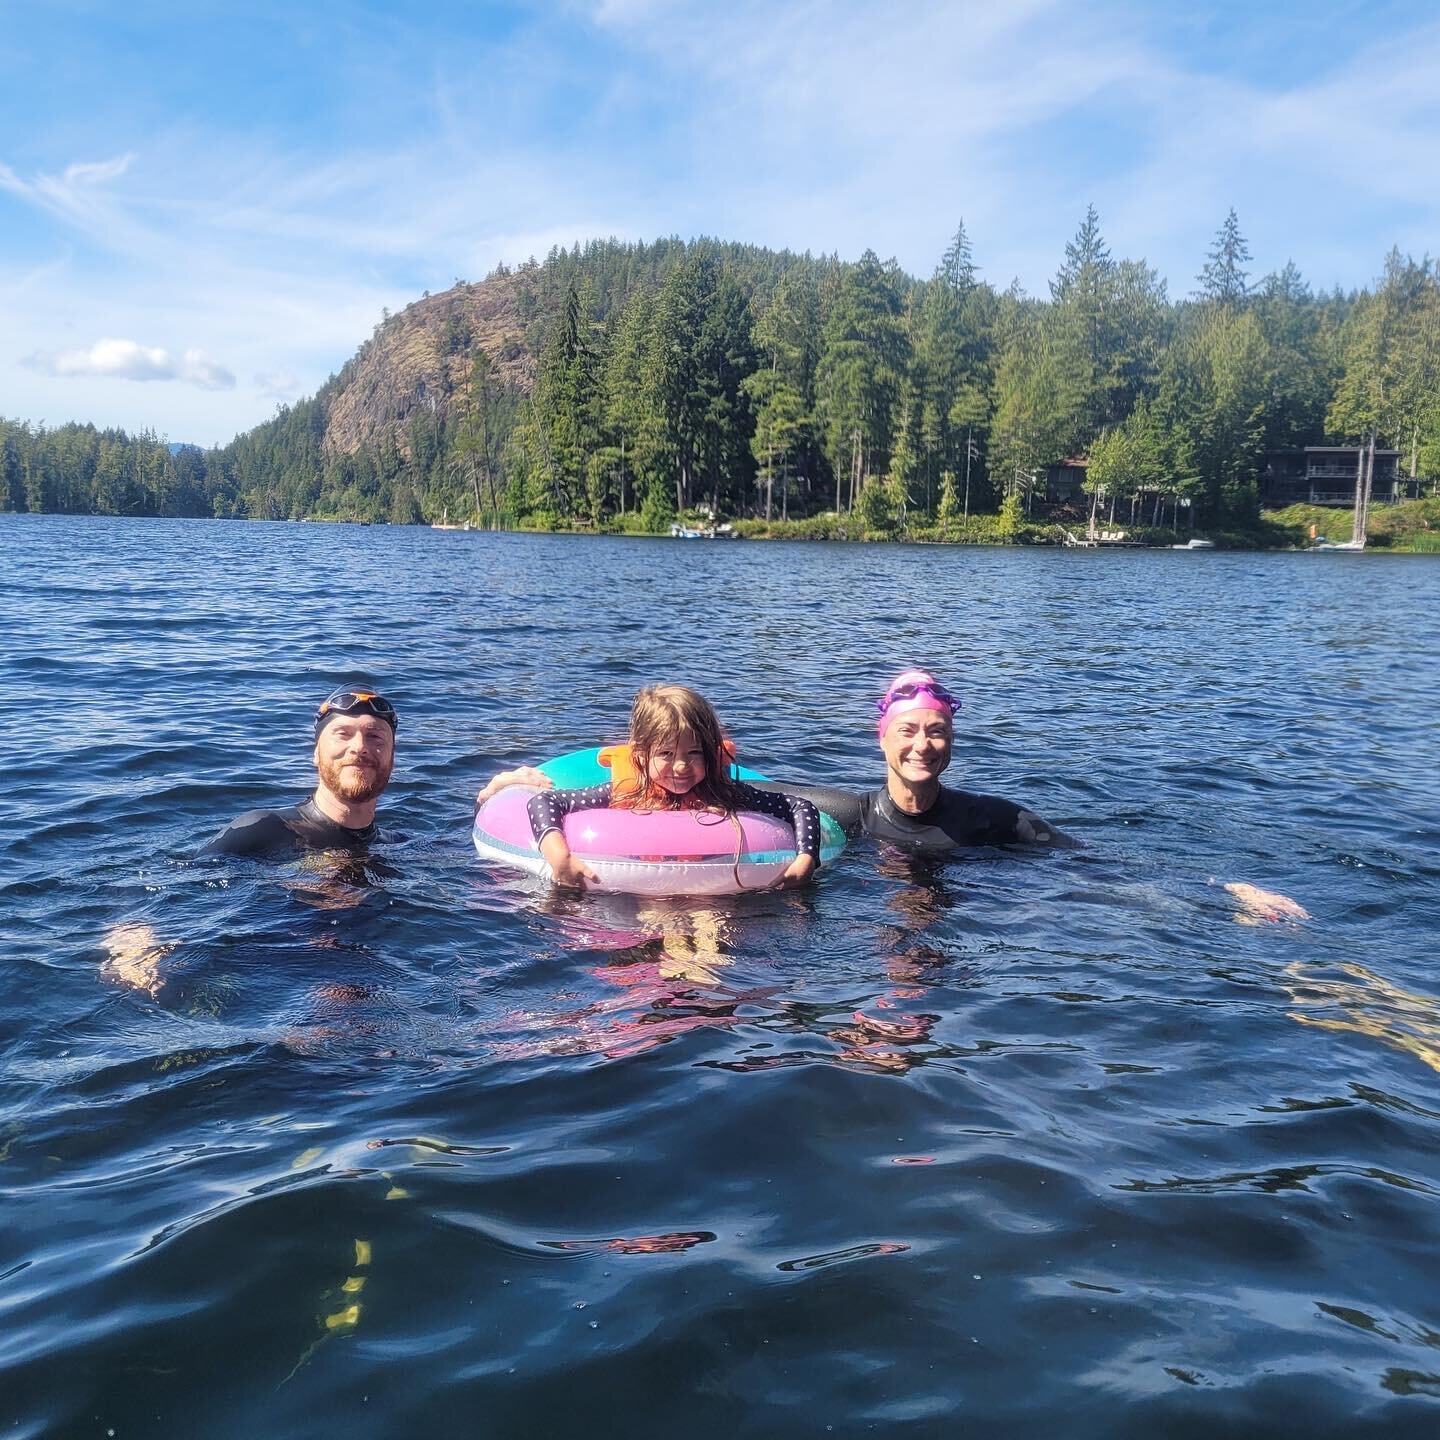 Highlights from an amazing long weekend in Pender Harbour with the Comberbach&rsquo;s &ndash; we love you guys!! ❤️❤️

Cozy in our tiny cabin, gorgeous hikes with incredible views (and big fat juicy blackberries), swimming in the lake and snorkeling 